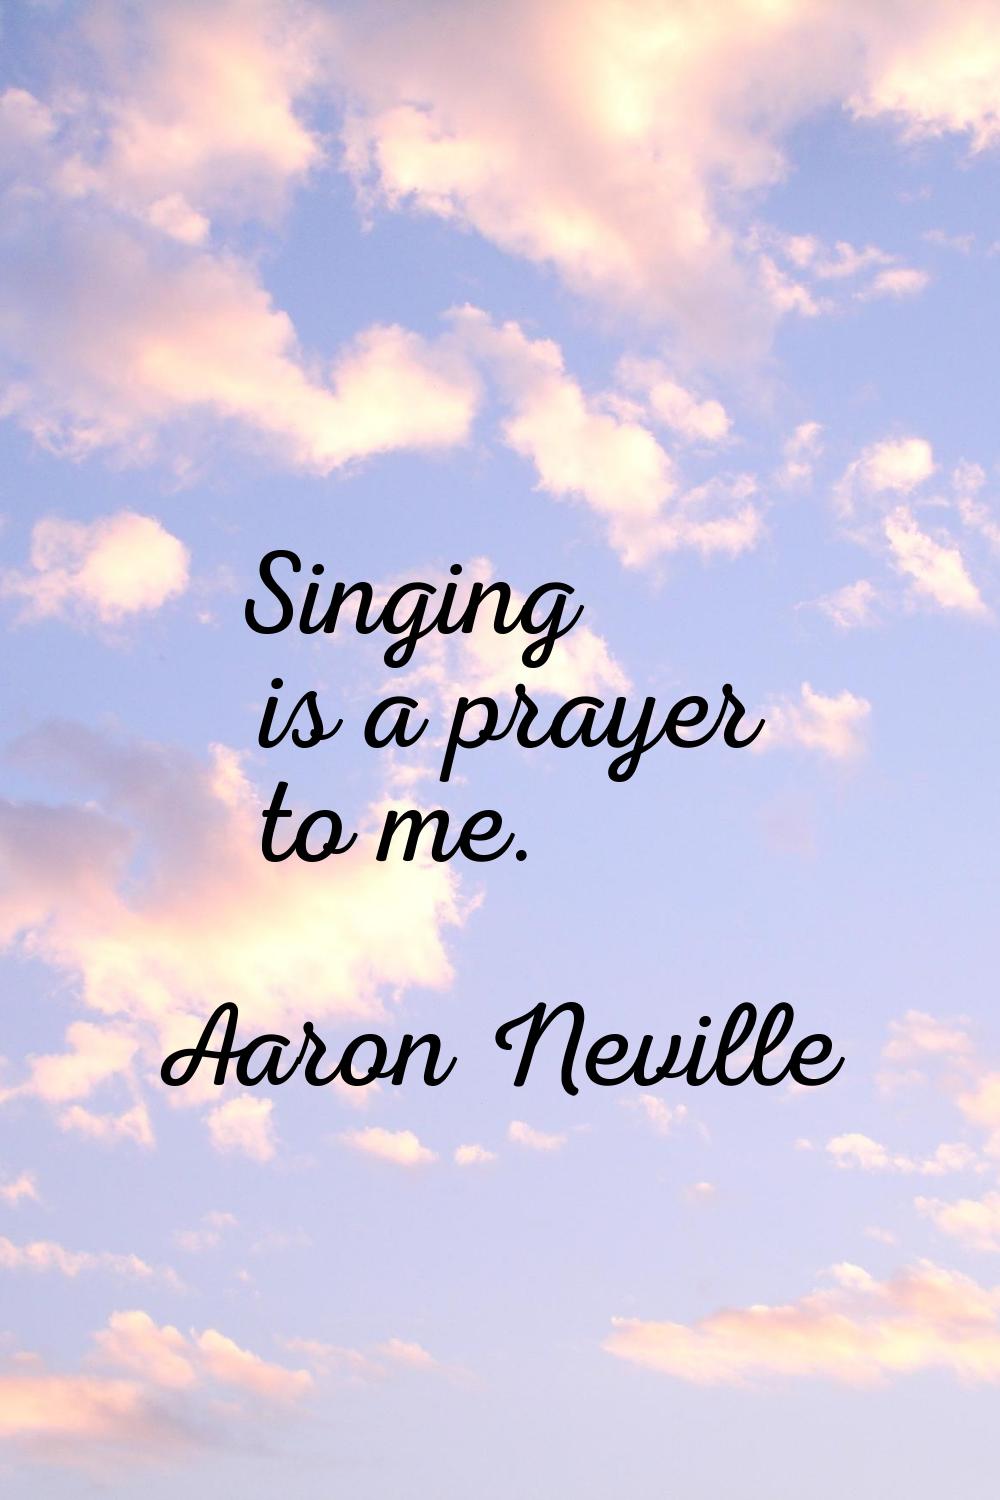 Singing is a prayer to me.